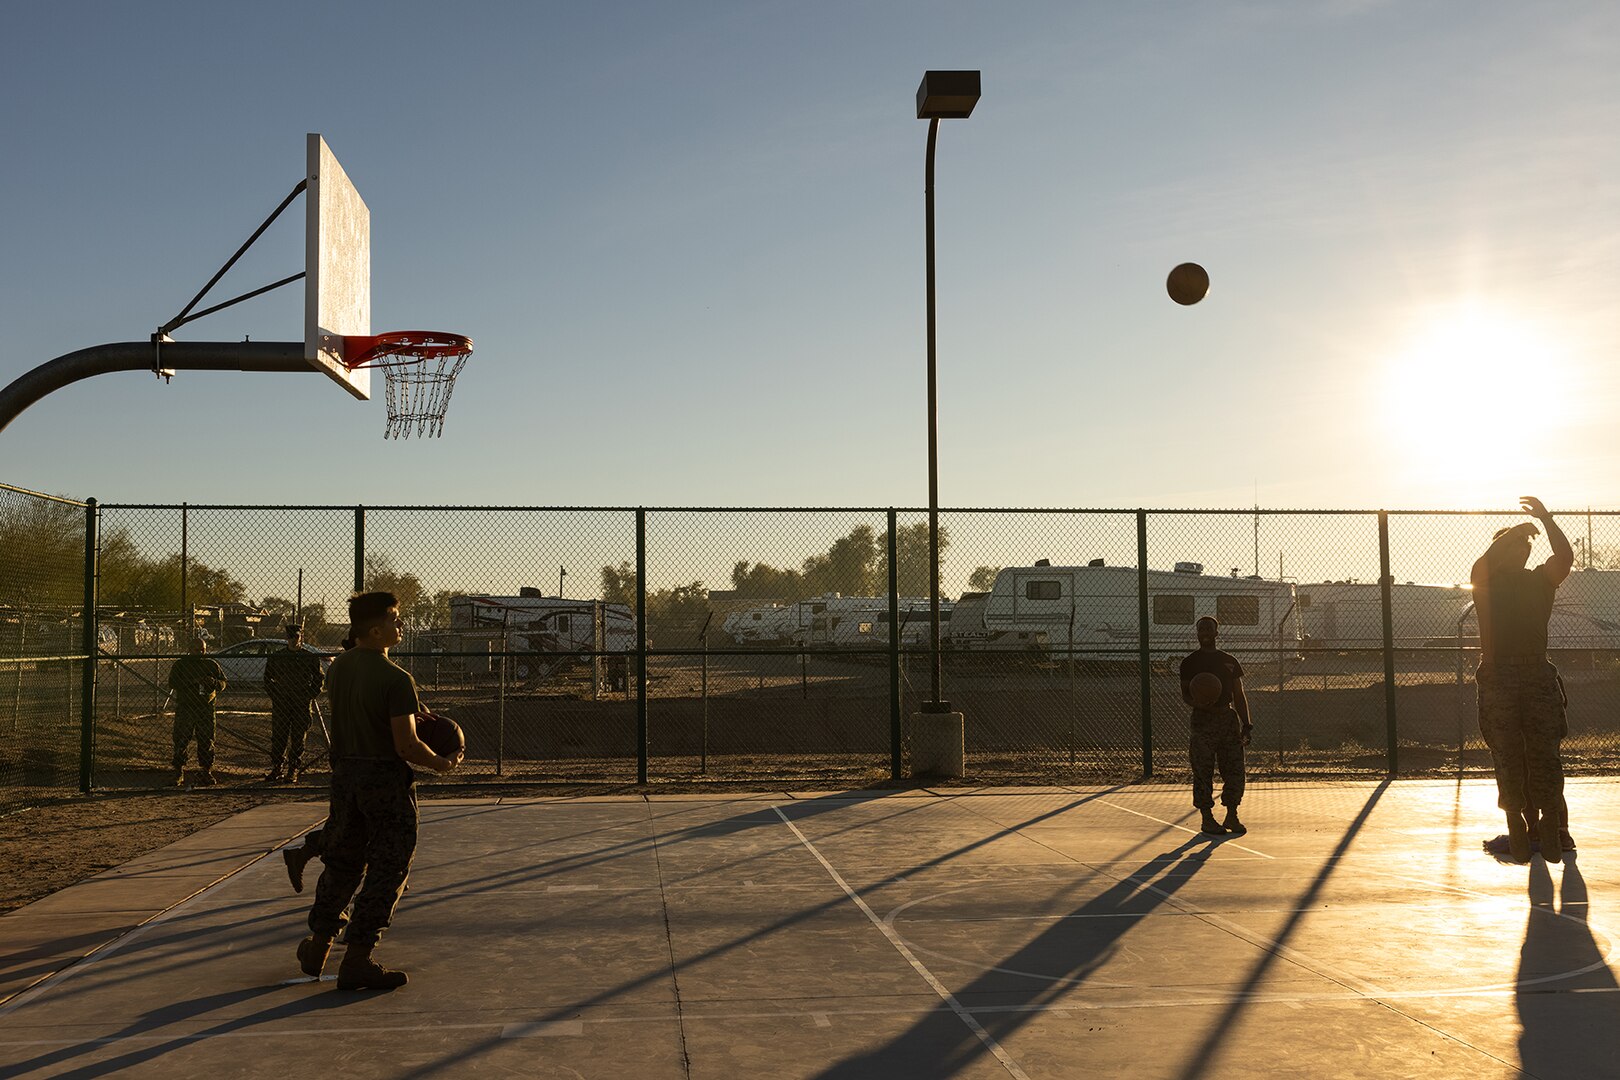 Service members play basketball on an outdoor court.